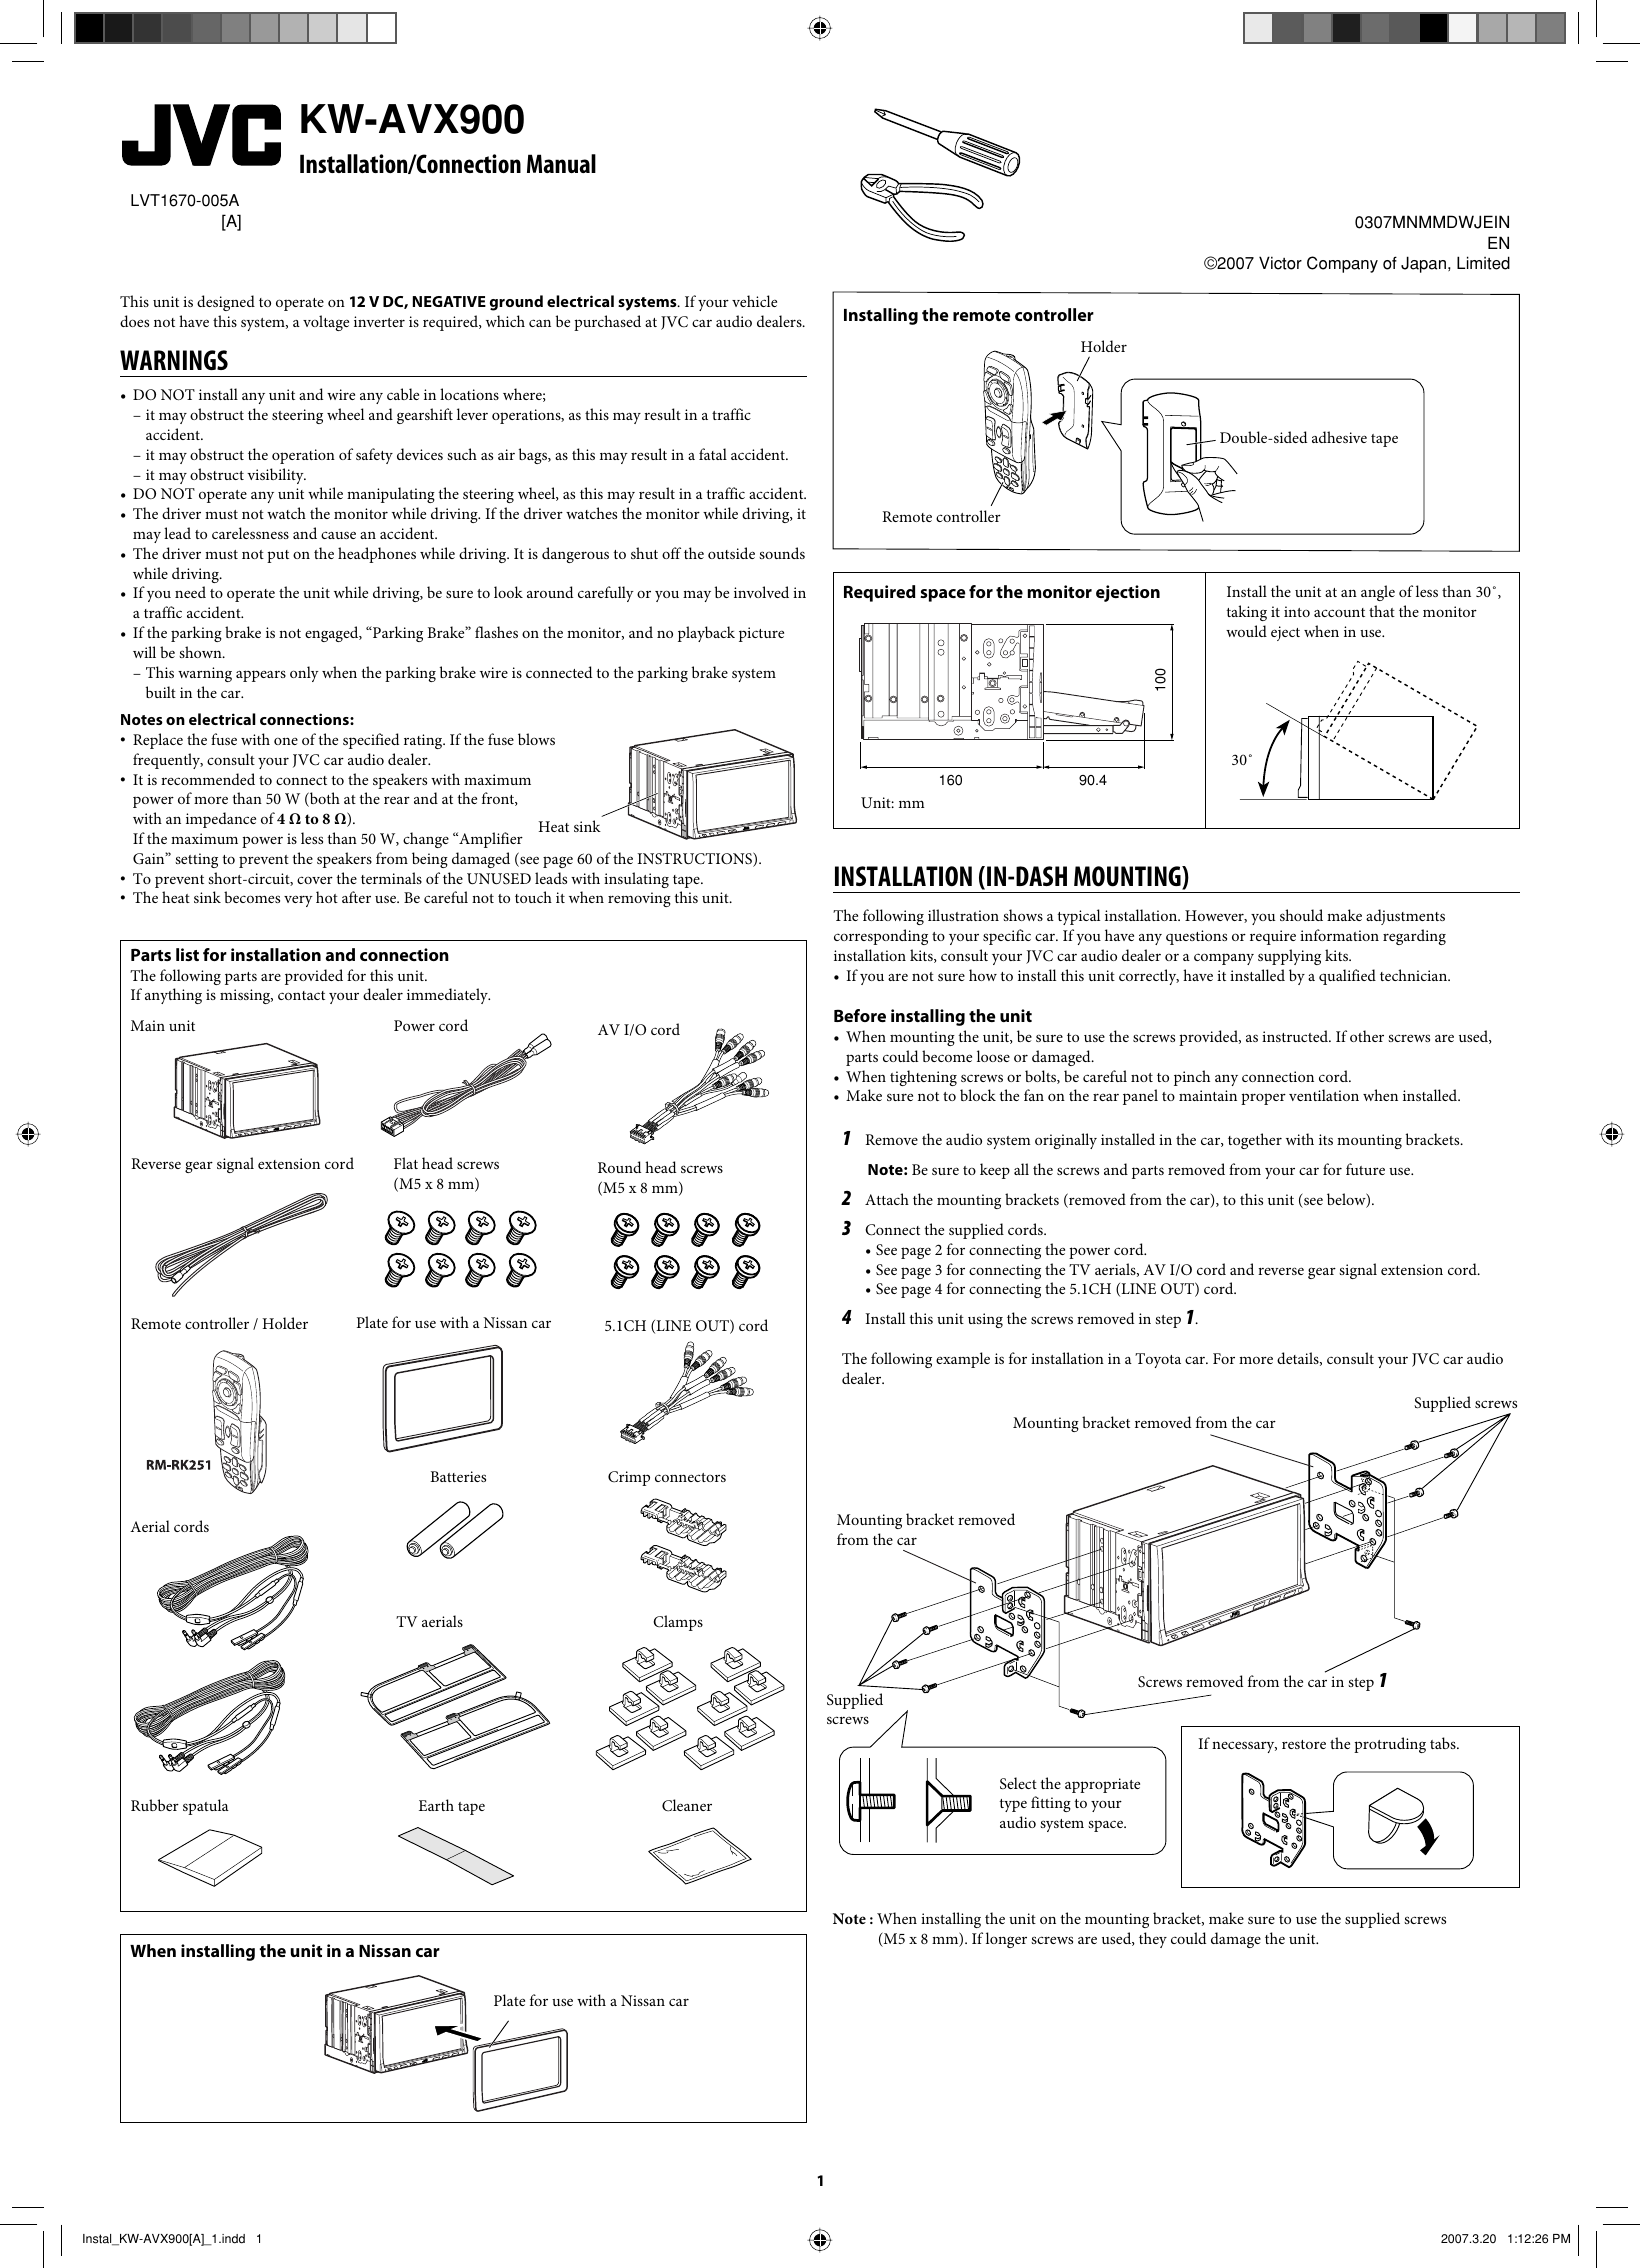 Page 1 of 4 - JVC KW-AVX900A KW-AVX900[A] Installation User Manual LVT1670-005A